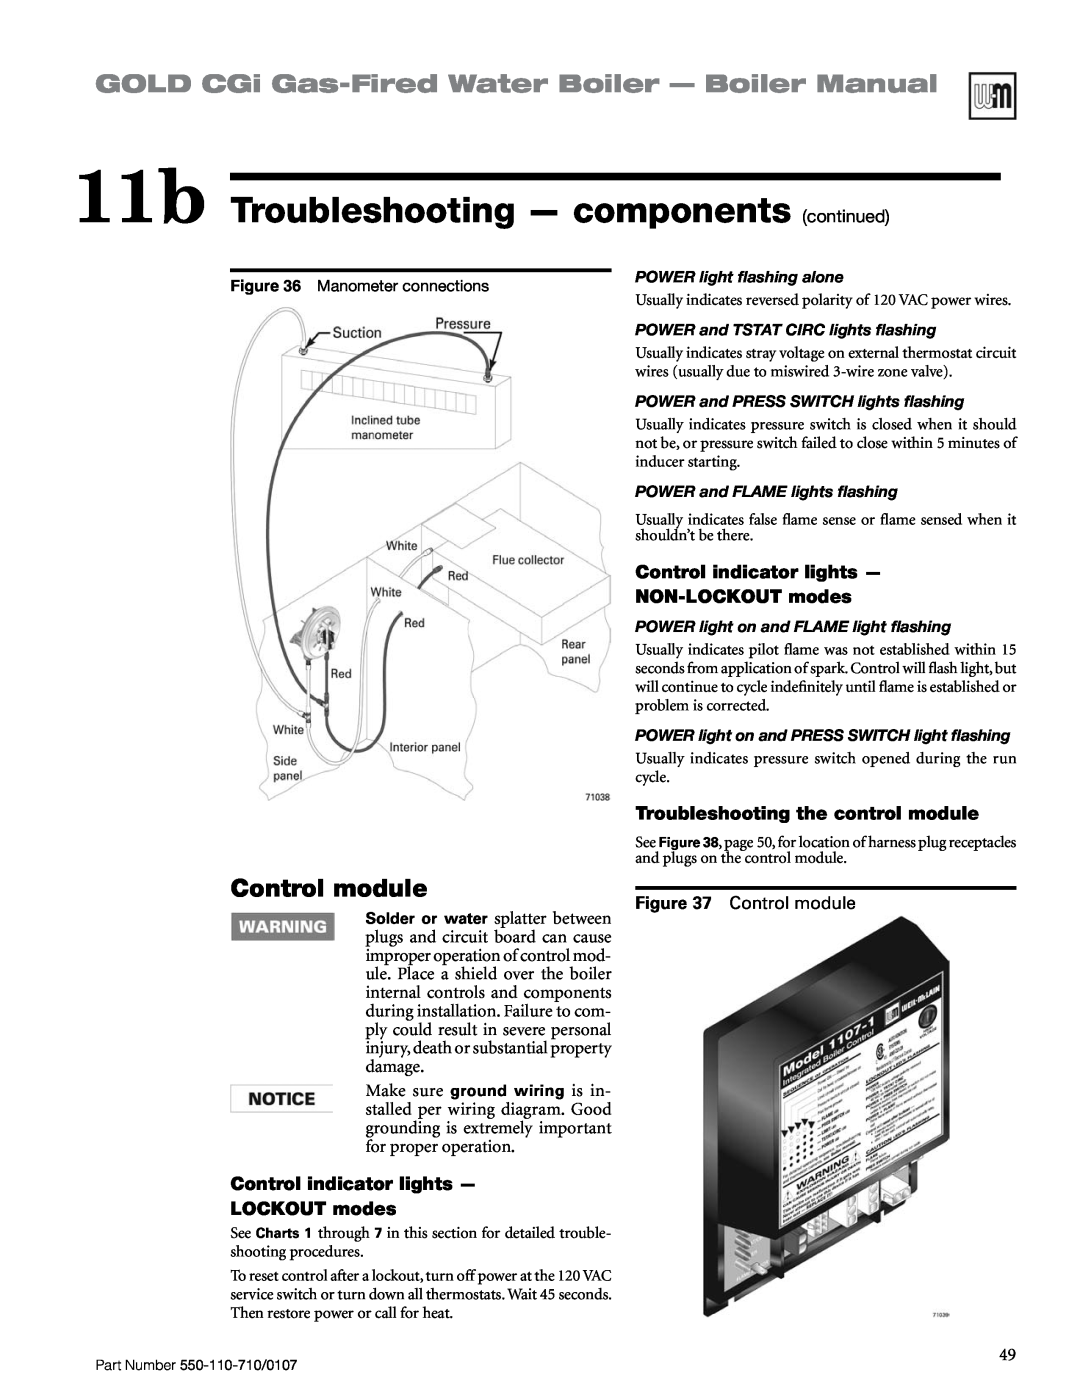 Weil-McLain Series 2 manual 11b Troubleshooting — components continued, GOLD CGi Gas-FiredWater Boiler — Boiler Manual 